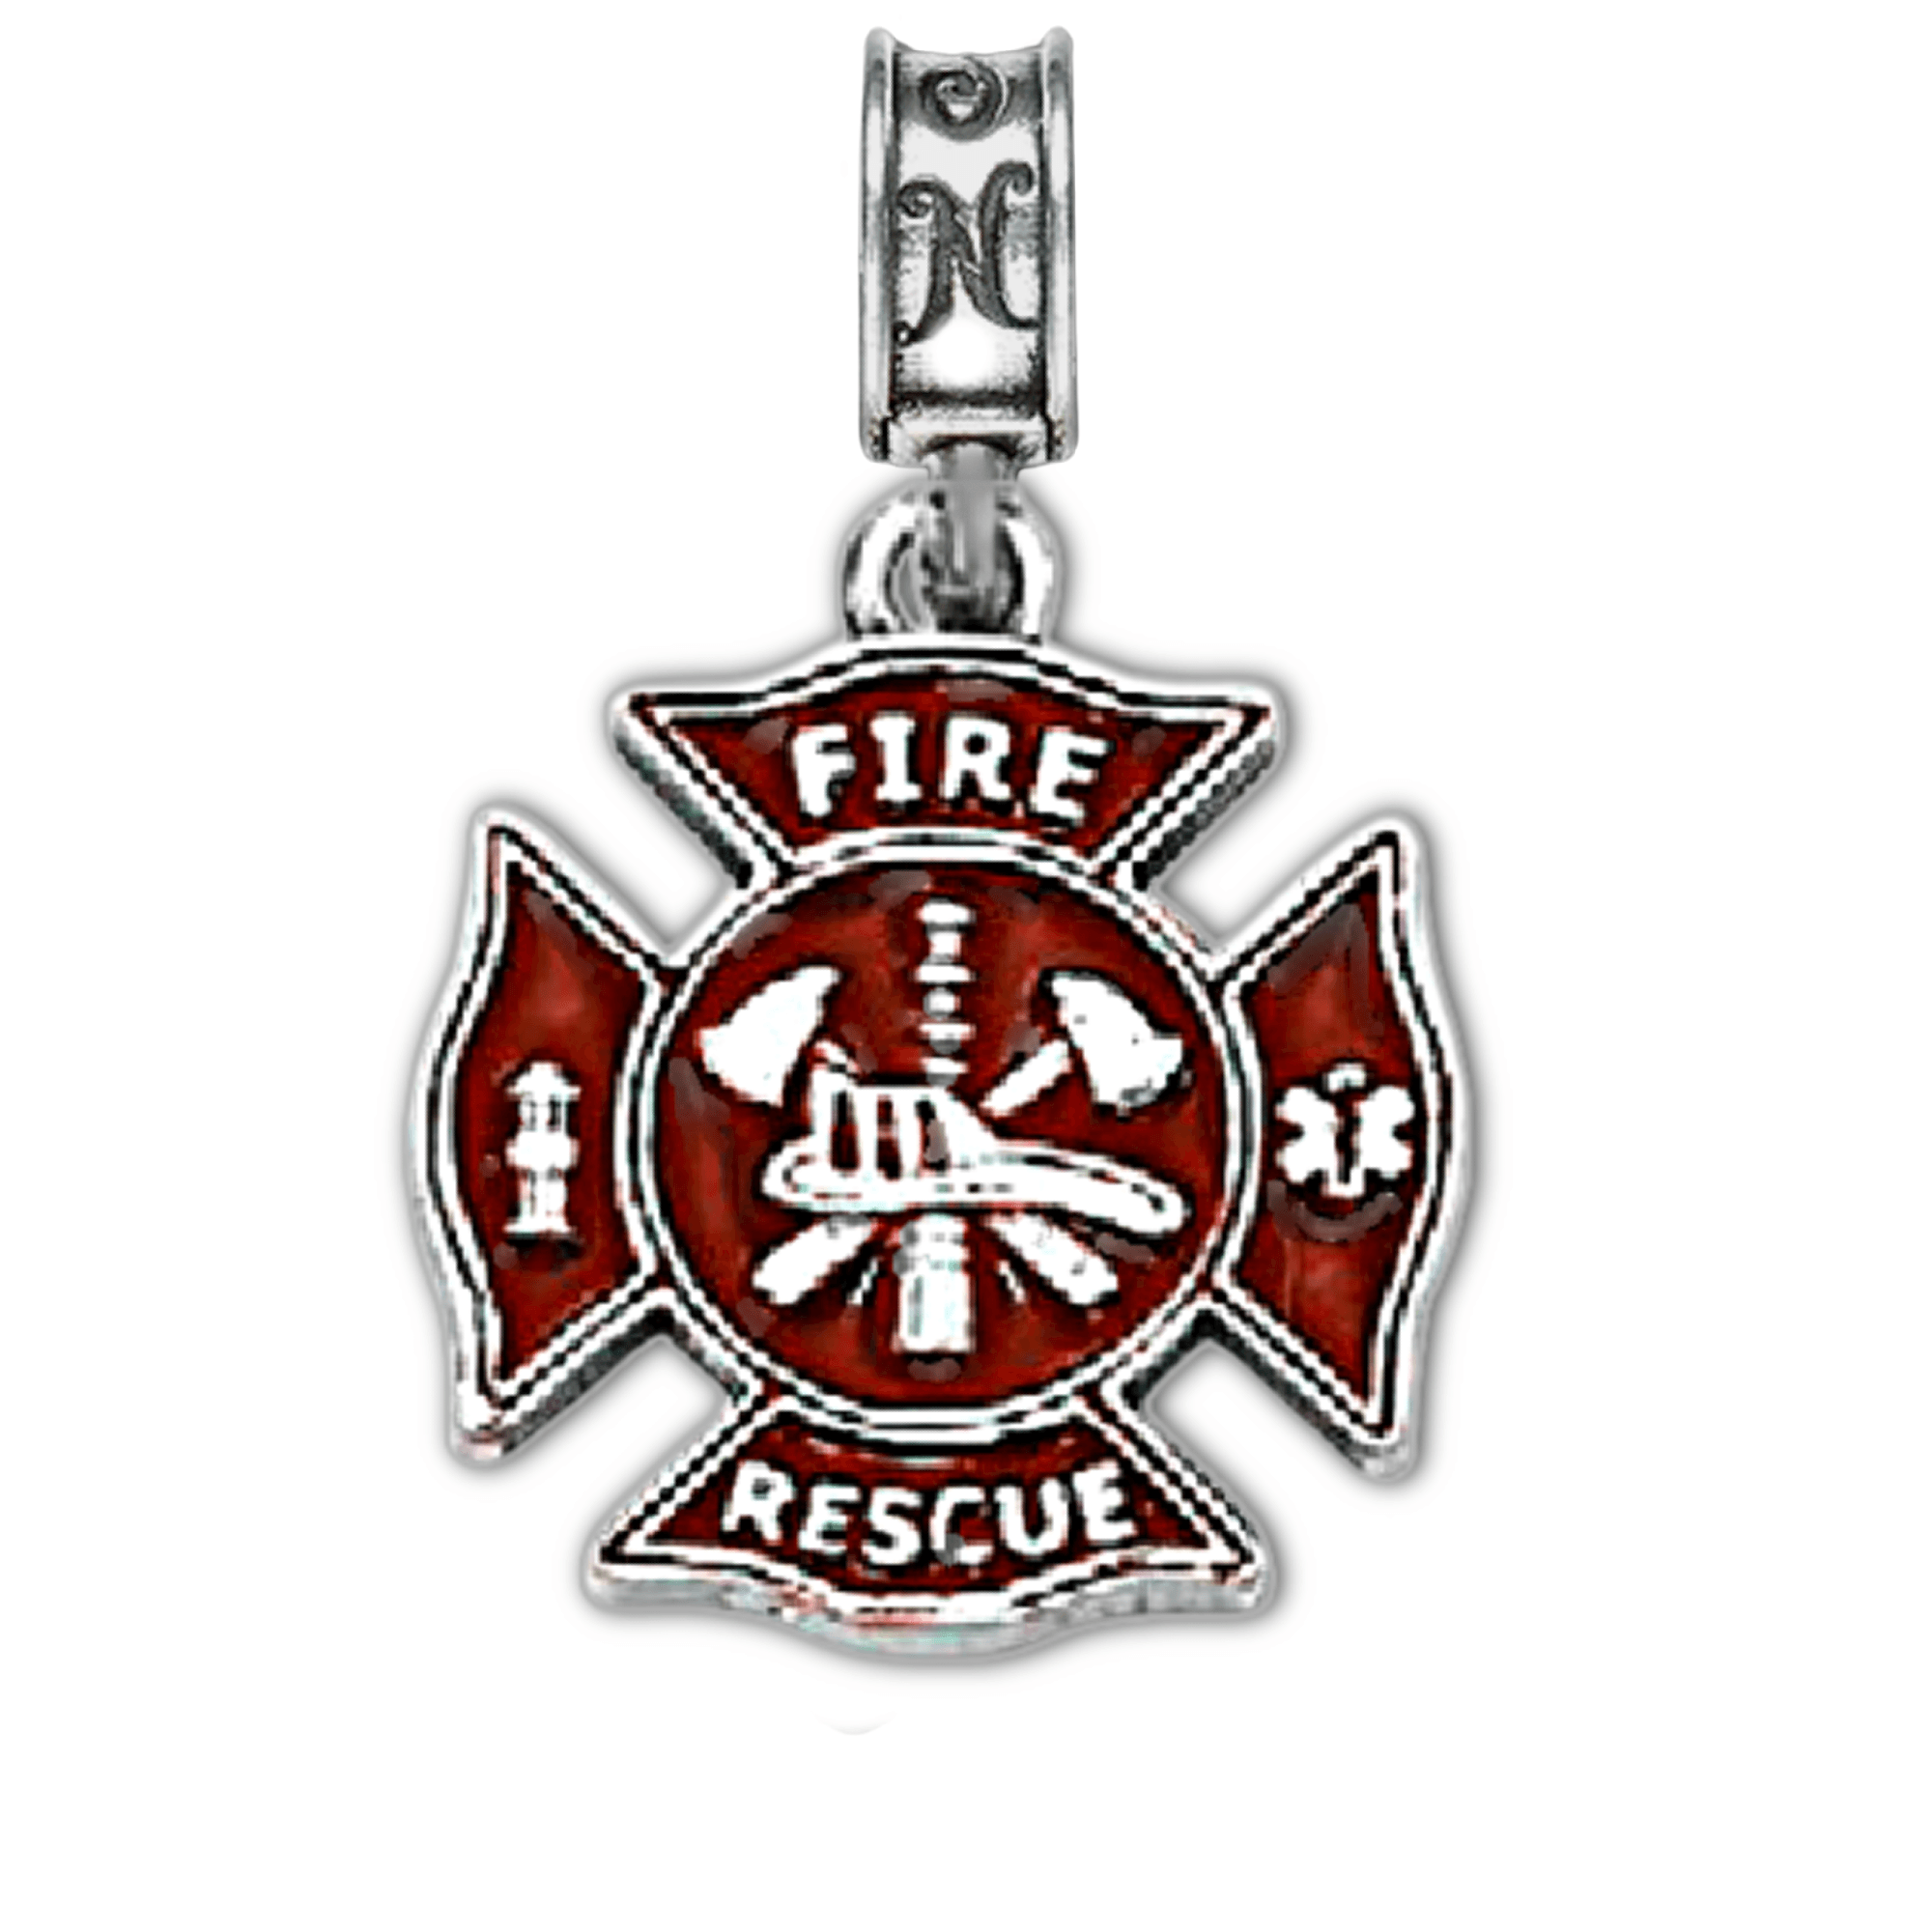 Military Jewelry, Military Charms, Military Gifts,  Fire and Rescue Charm, First Responder Charm